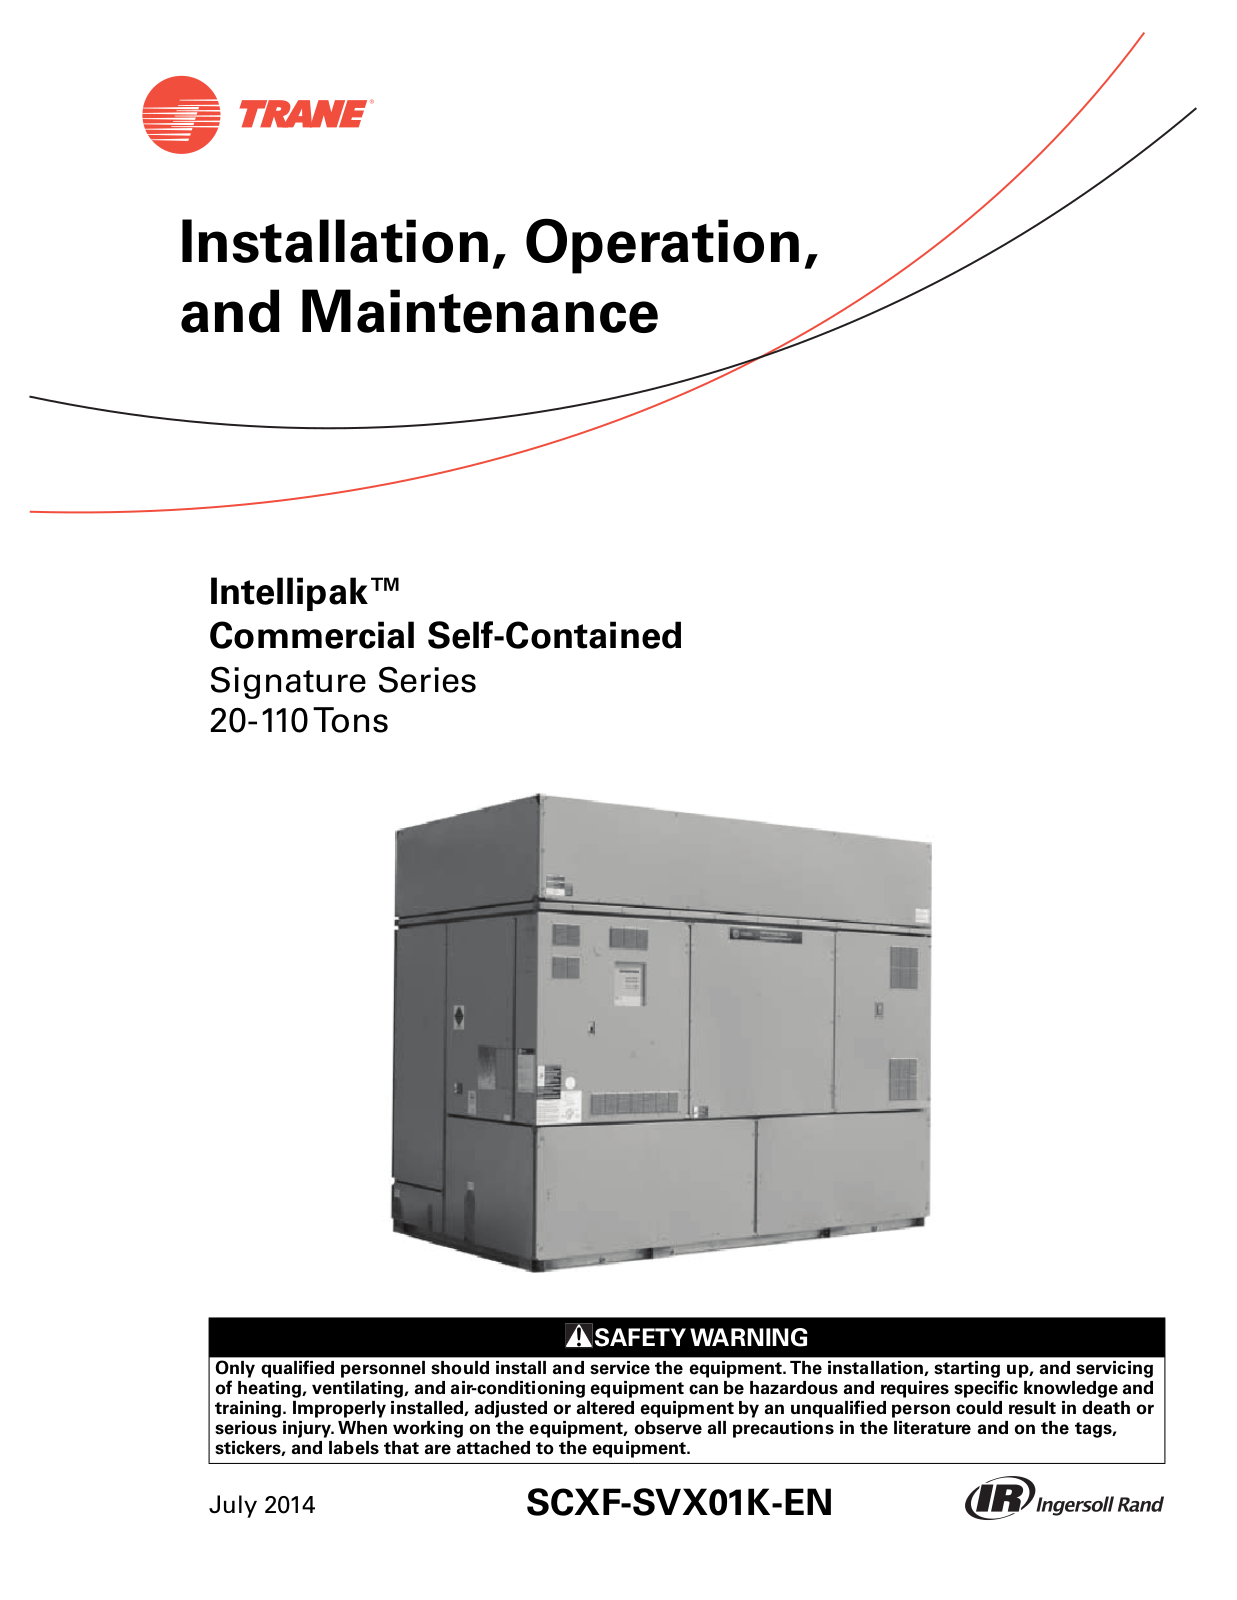 Trane Intellipak Commercial Self-Contained Installation and Maintenance Manual